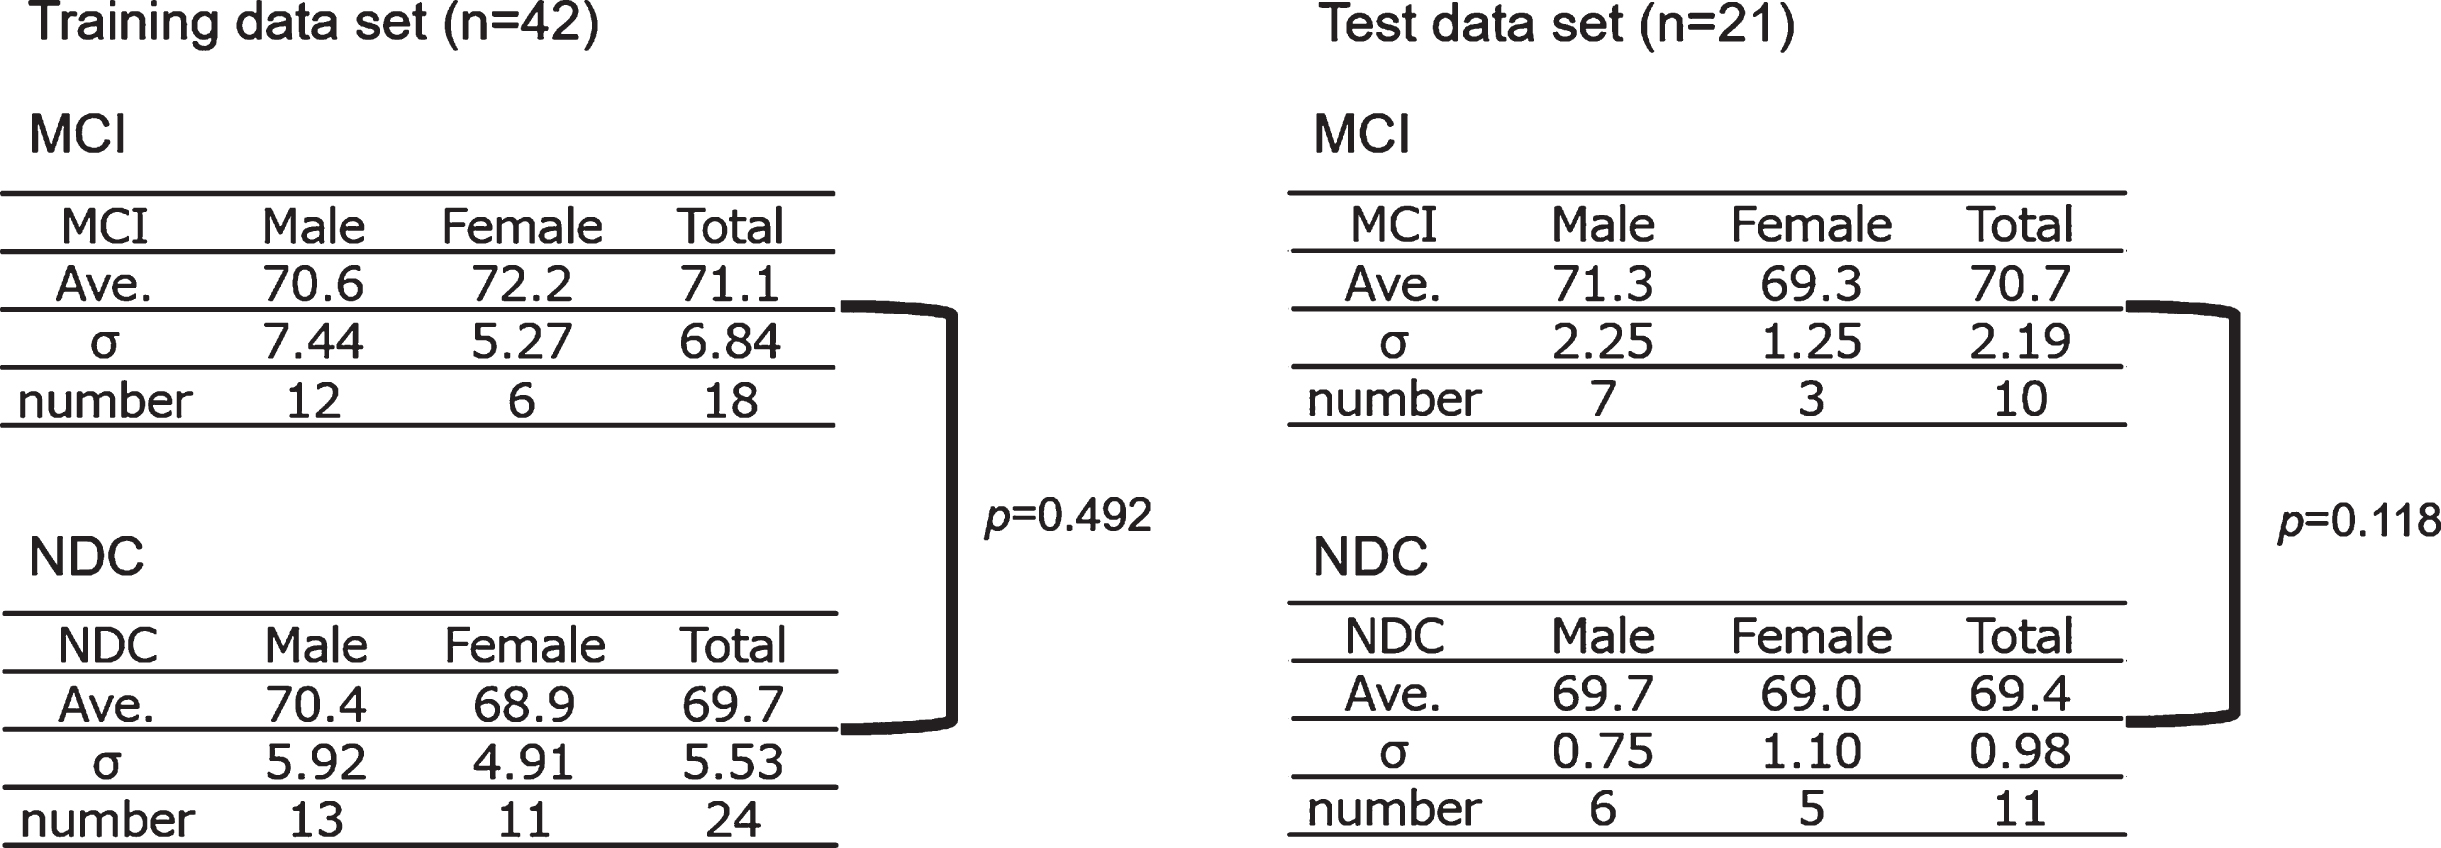 Subject allocation. The gender and age in the MCI and NDC group were shown. Neither the training data set nor the test data set showed a significant difference in age between the MCI and NDC groups. MCI, mild cognitive impairment; NDC, non-dementia controls; Ave., average age.